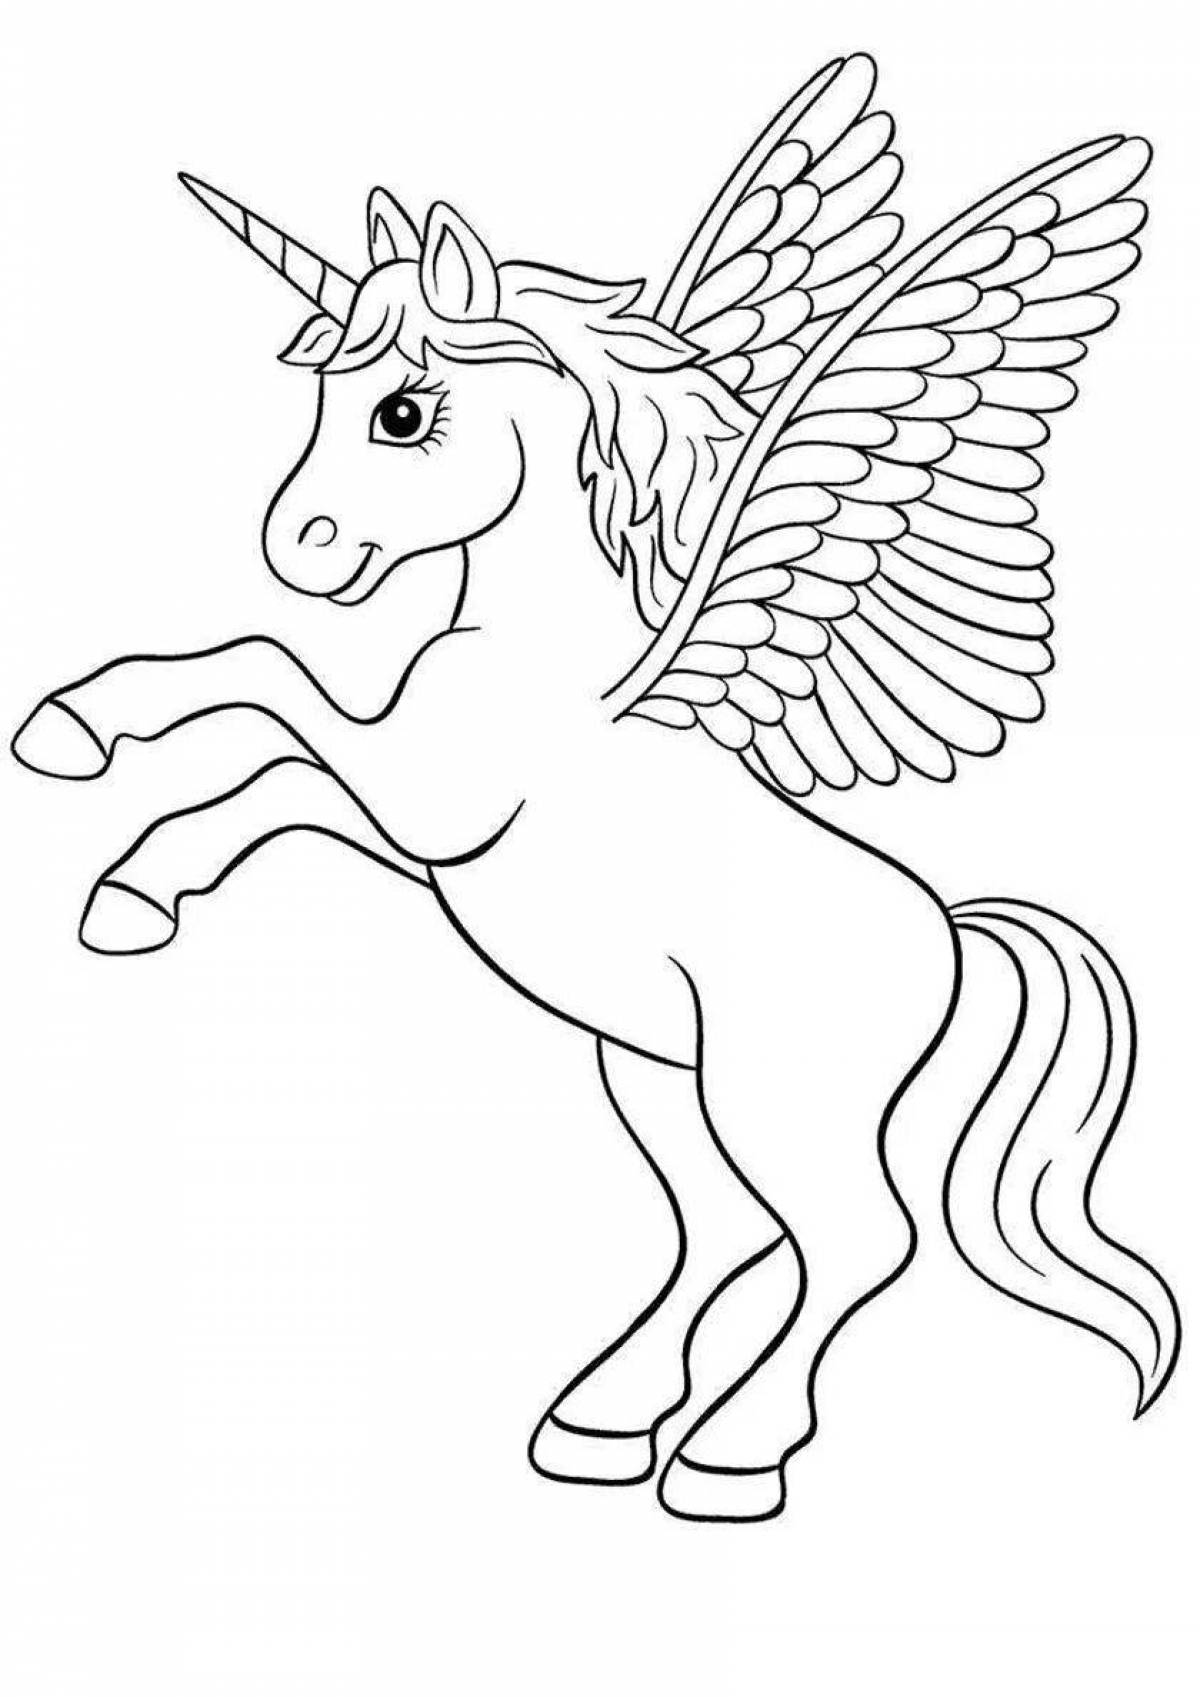 Exquisite unicorn coloring book for kids